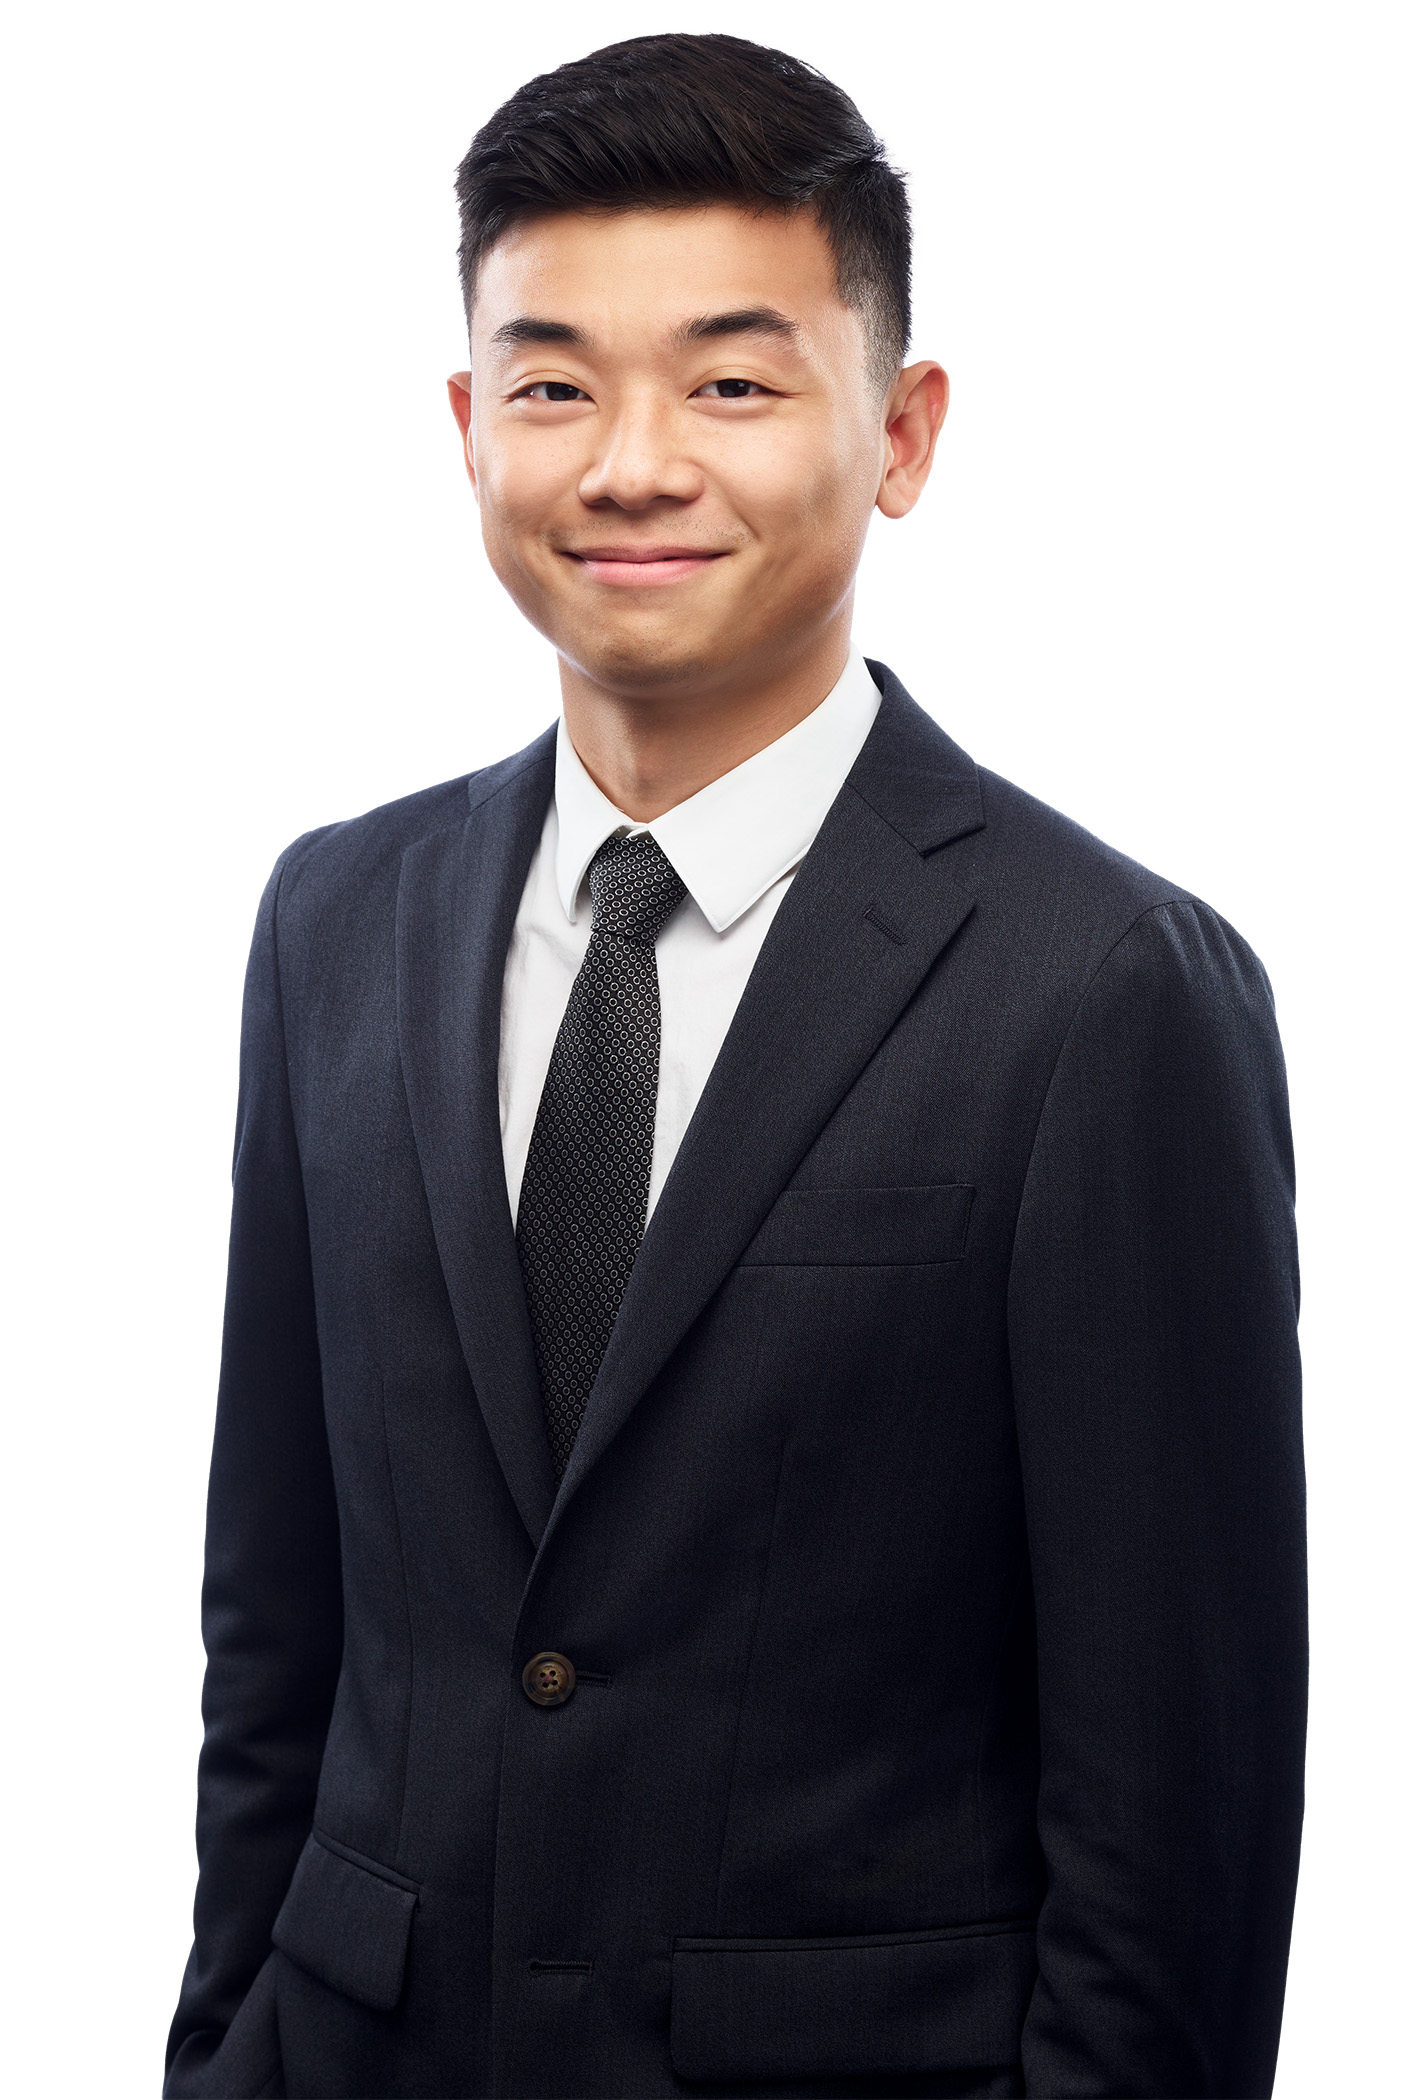 This is a photo of Christopher  Yam